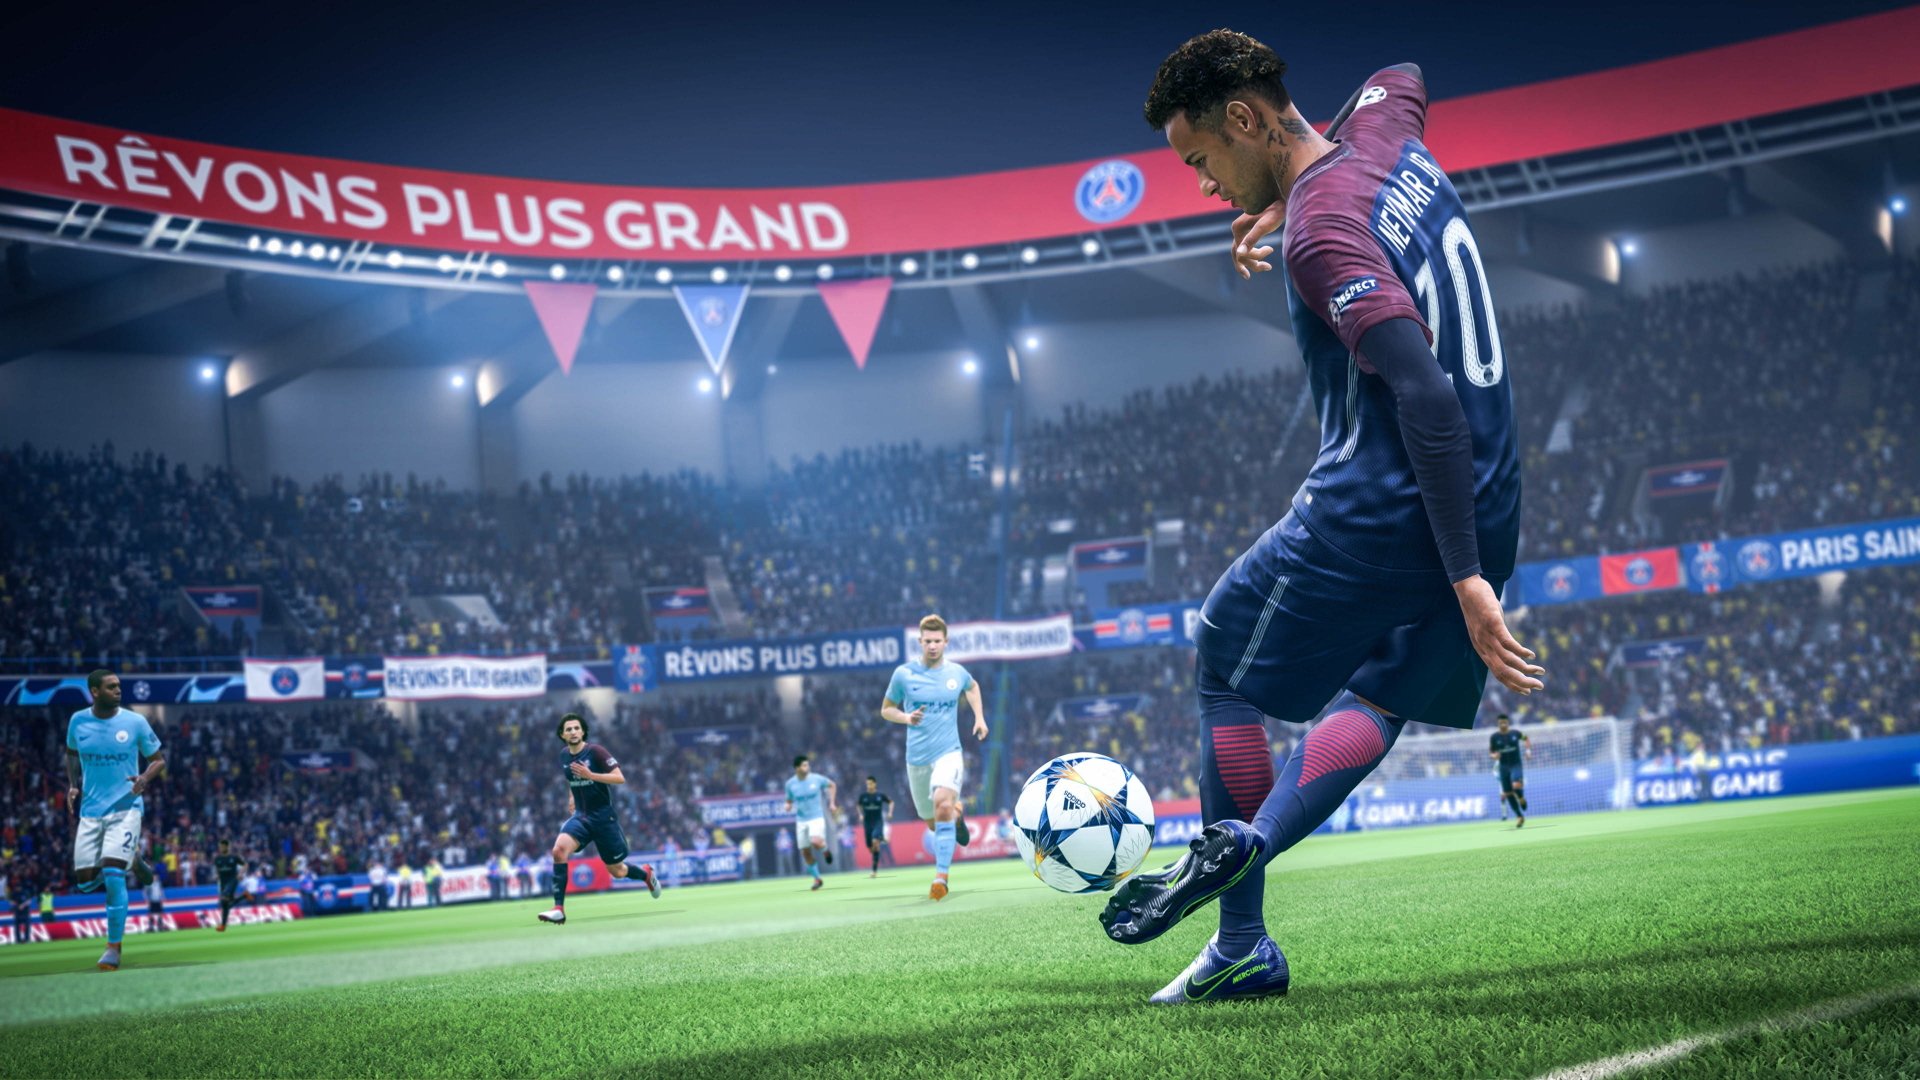 4K FIFA 19 Wallpapers | Background Images